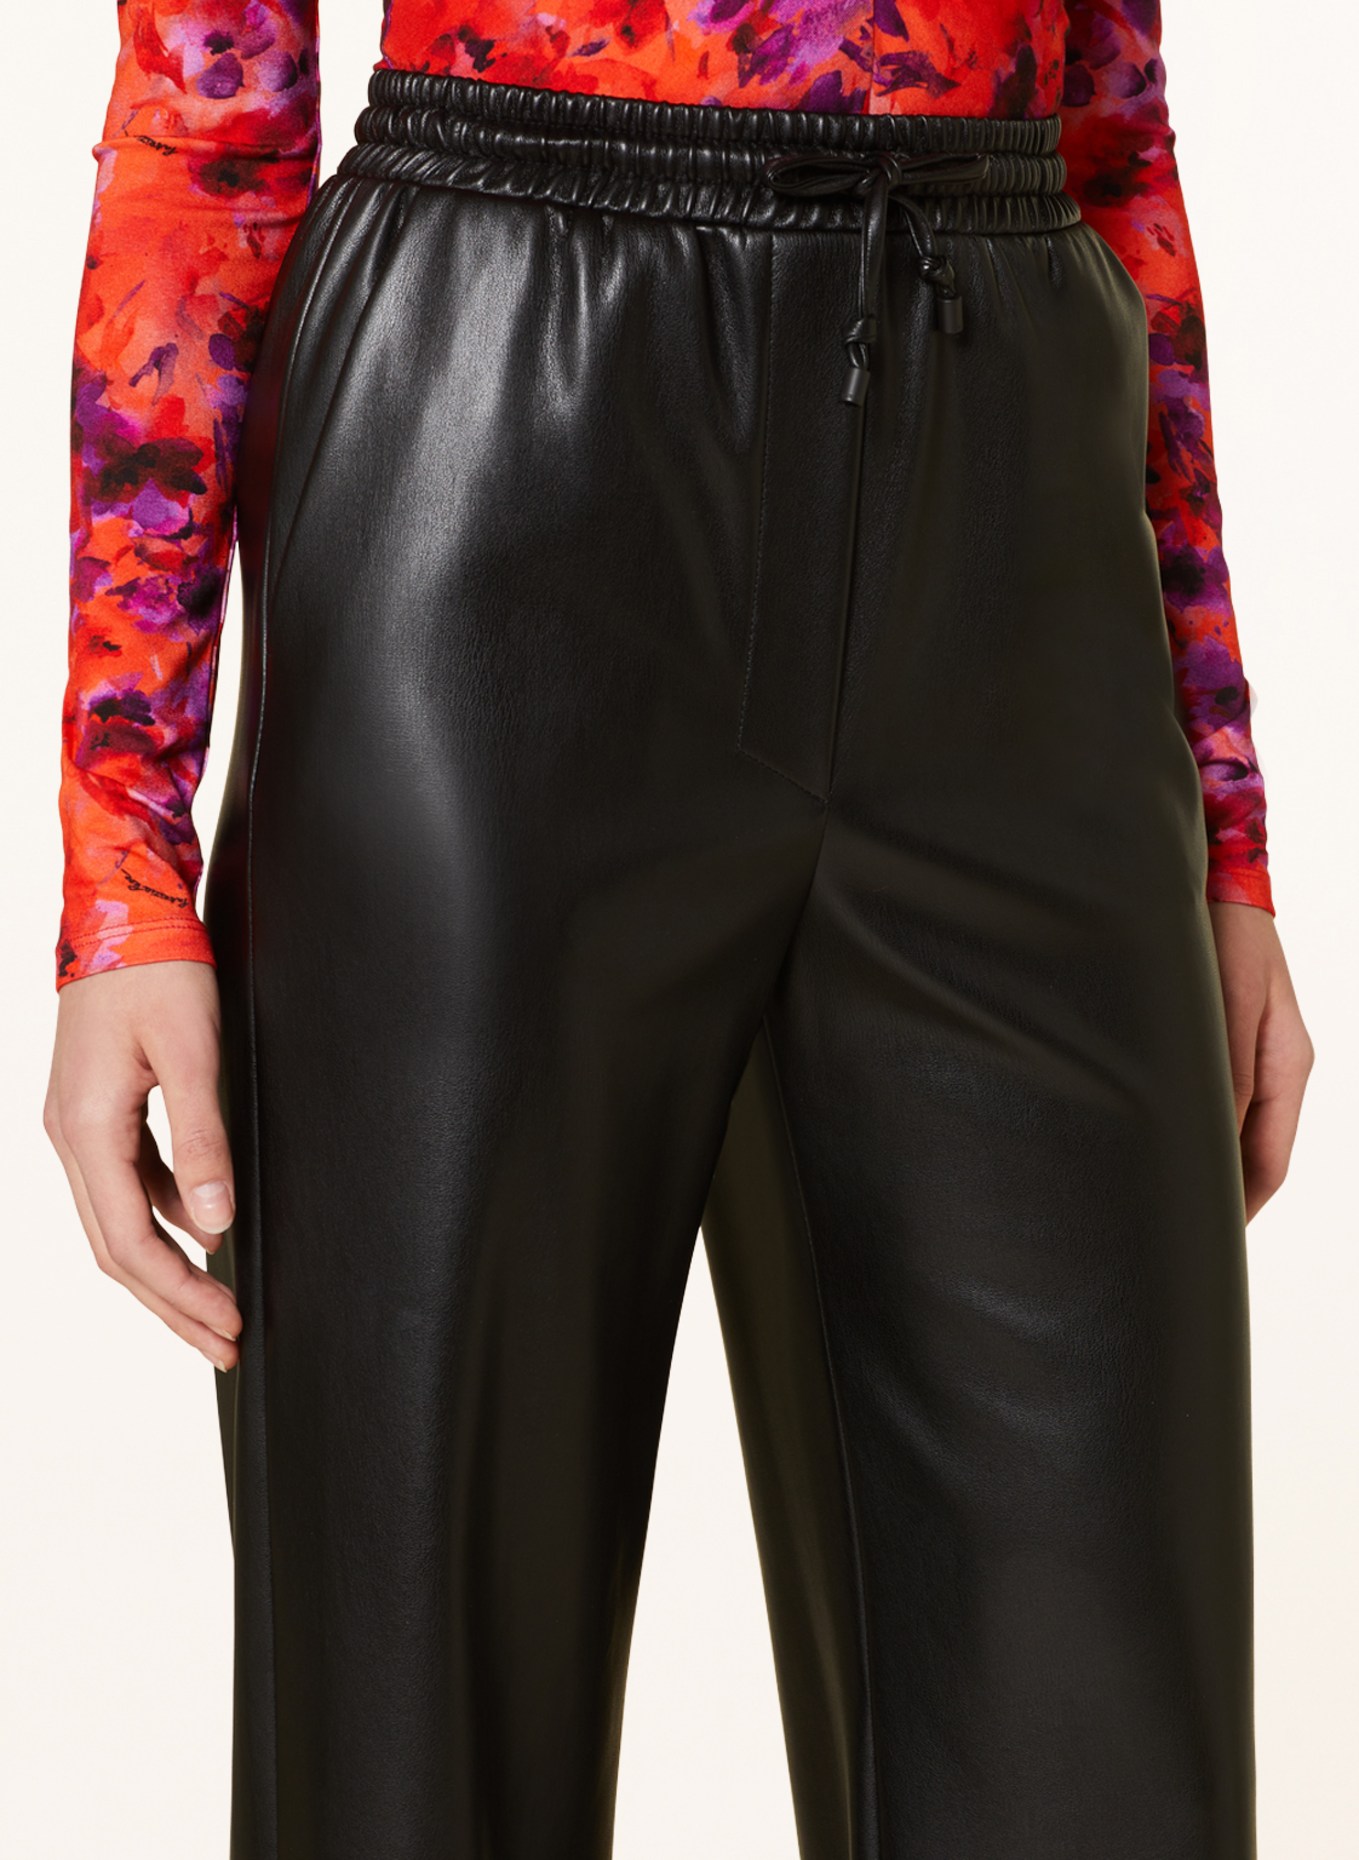 PATRIZIA PEPE Pants in jogger style in leather look, Color: BLACK (Image 5)